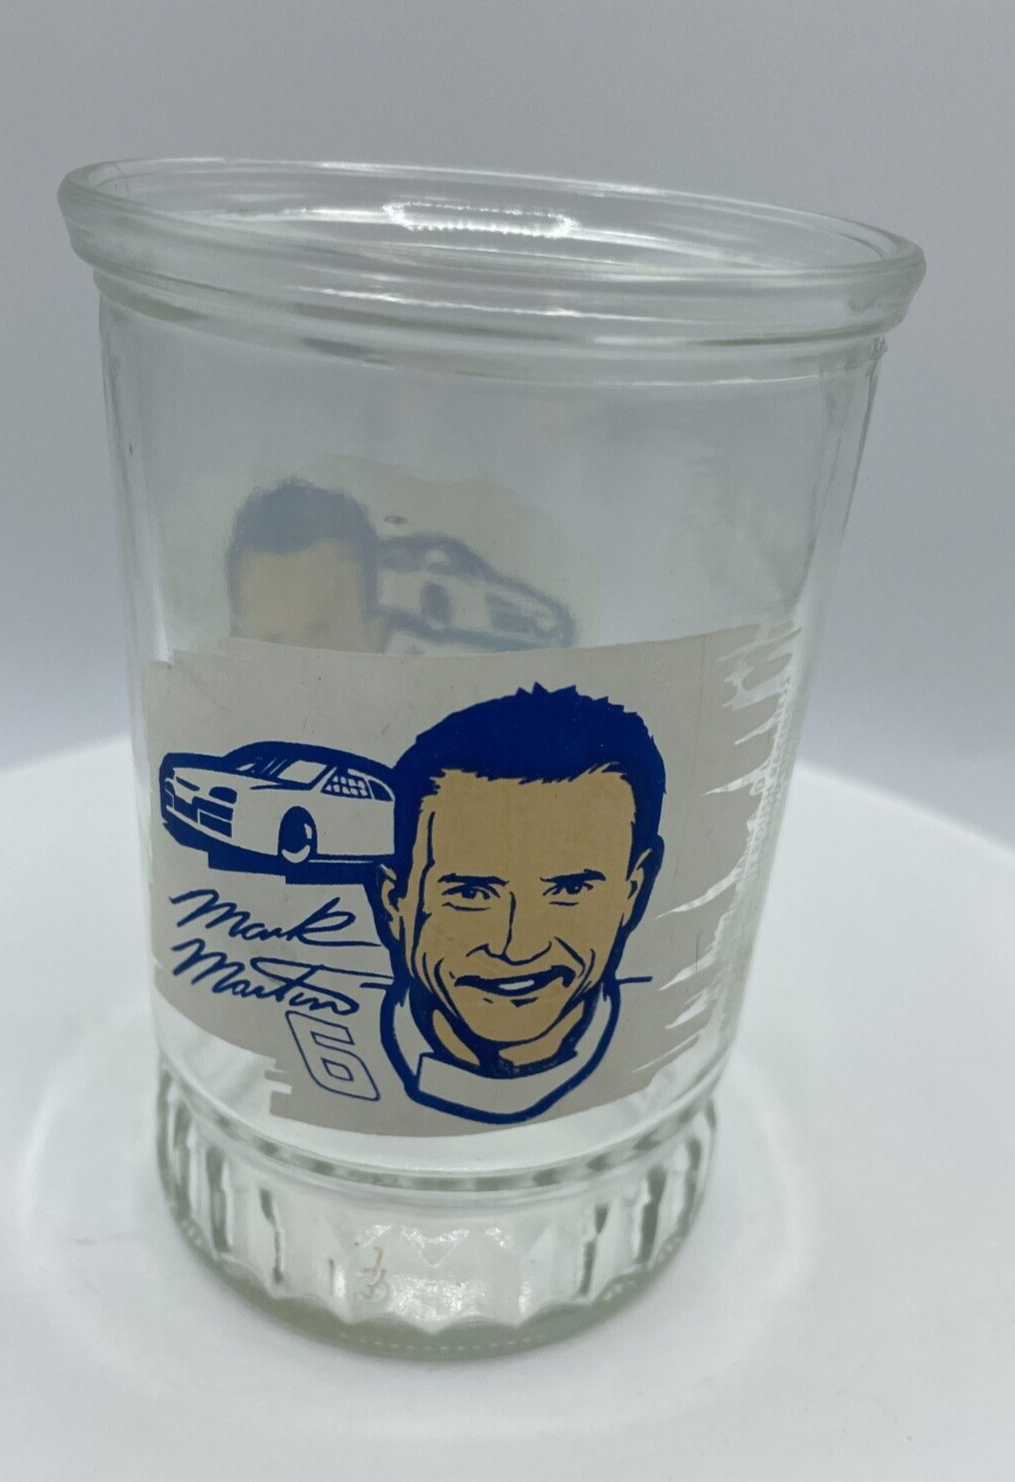 Primary image for Mark Martin Collectible Jelly Jar Bama Champion Driver Series #6 Juice Glass